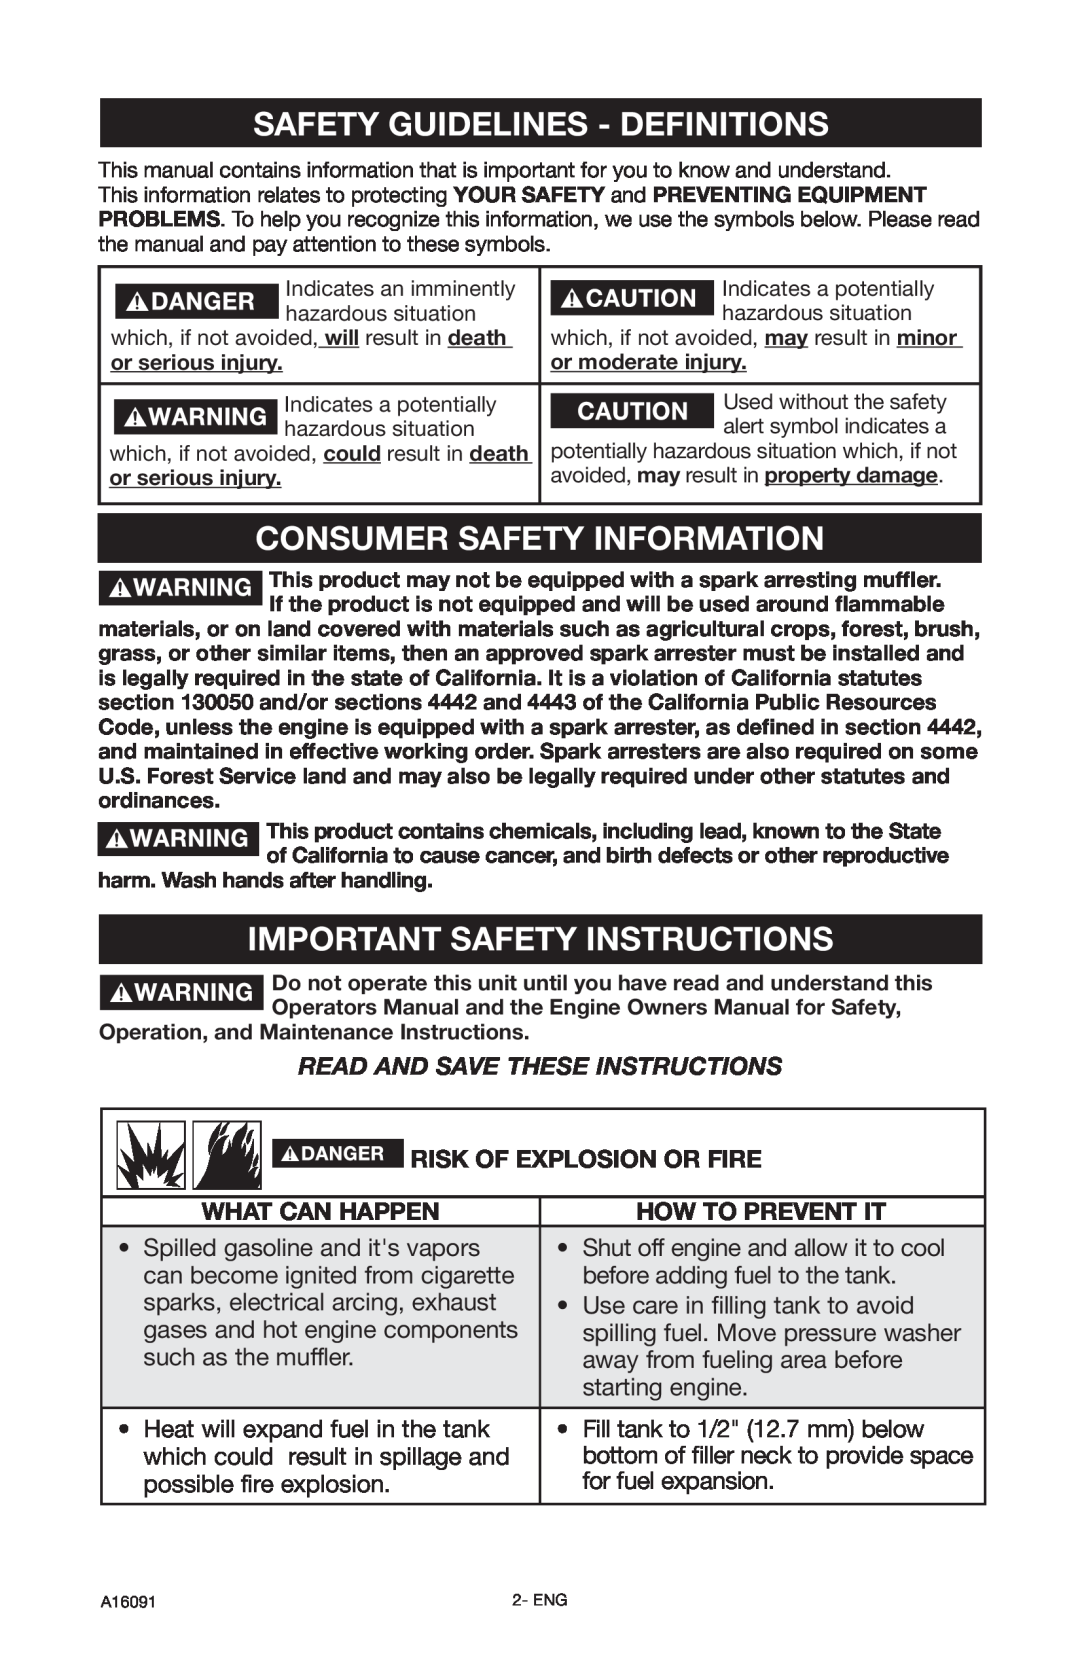 DeVillbiss Air Power Company A16091, DVH3000 Safety Guidelines - Definitions, Consumer Safety Information, What Can Happen 